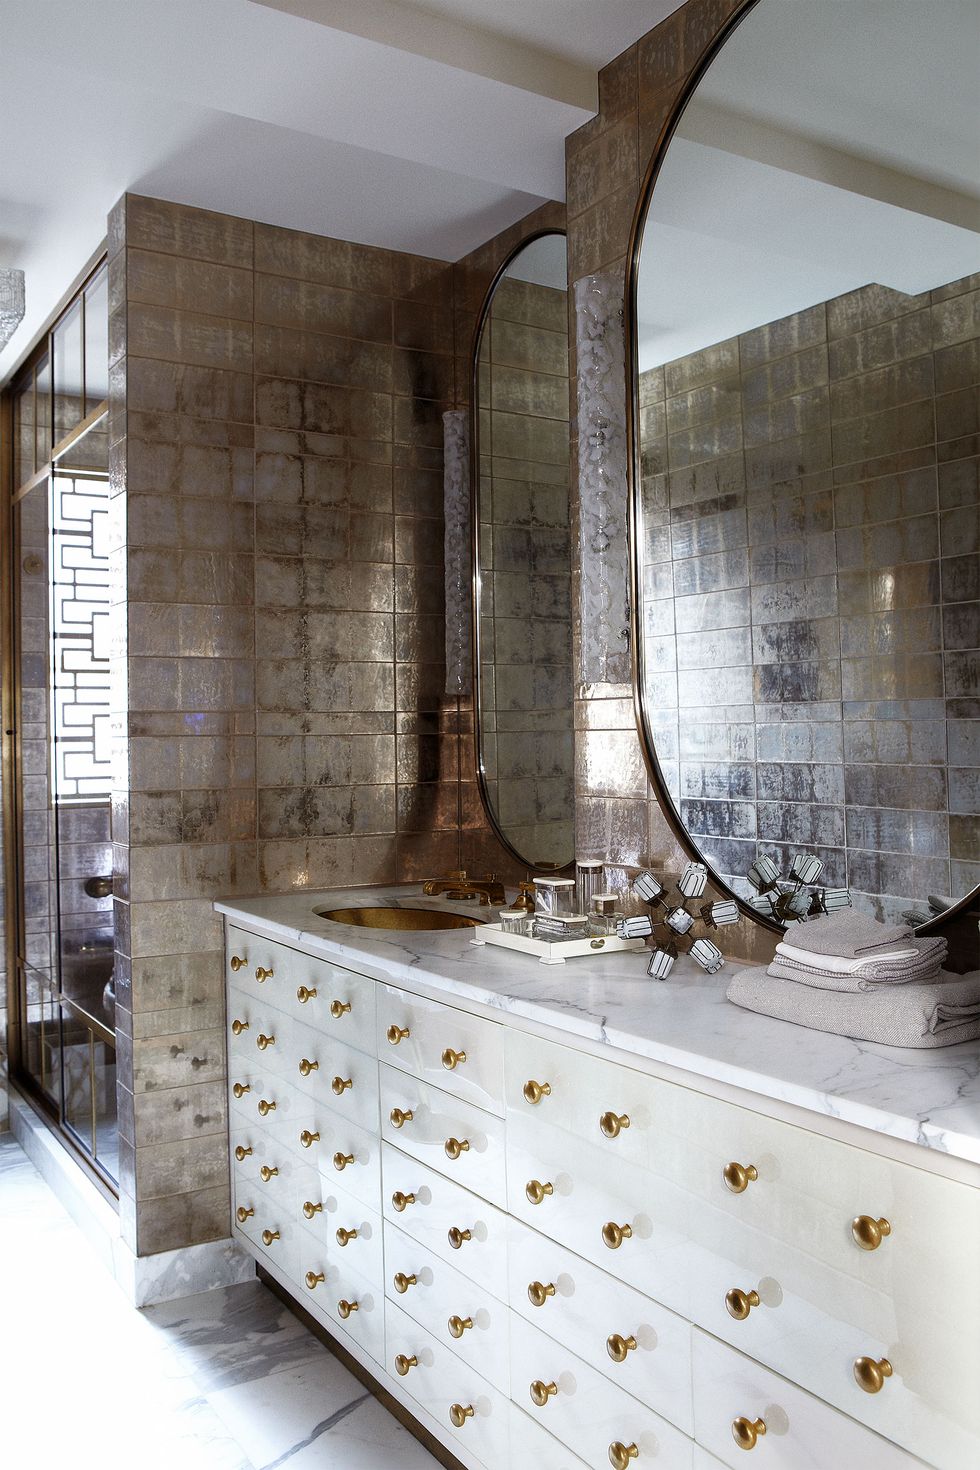 Bathroom with mercury glass effect tiles, large white vanity with brass pull handles and two large oval mirrors